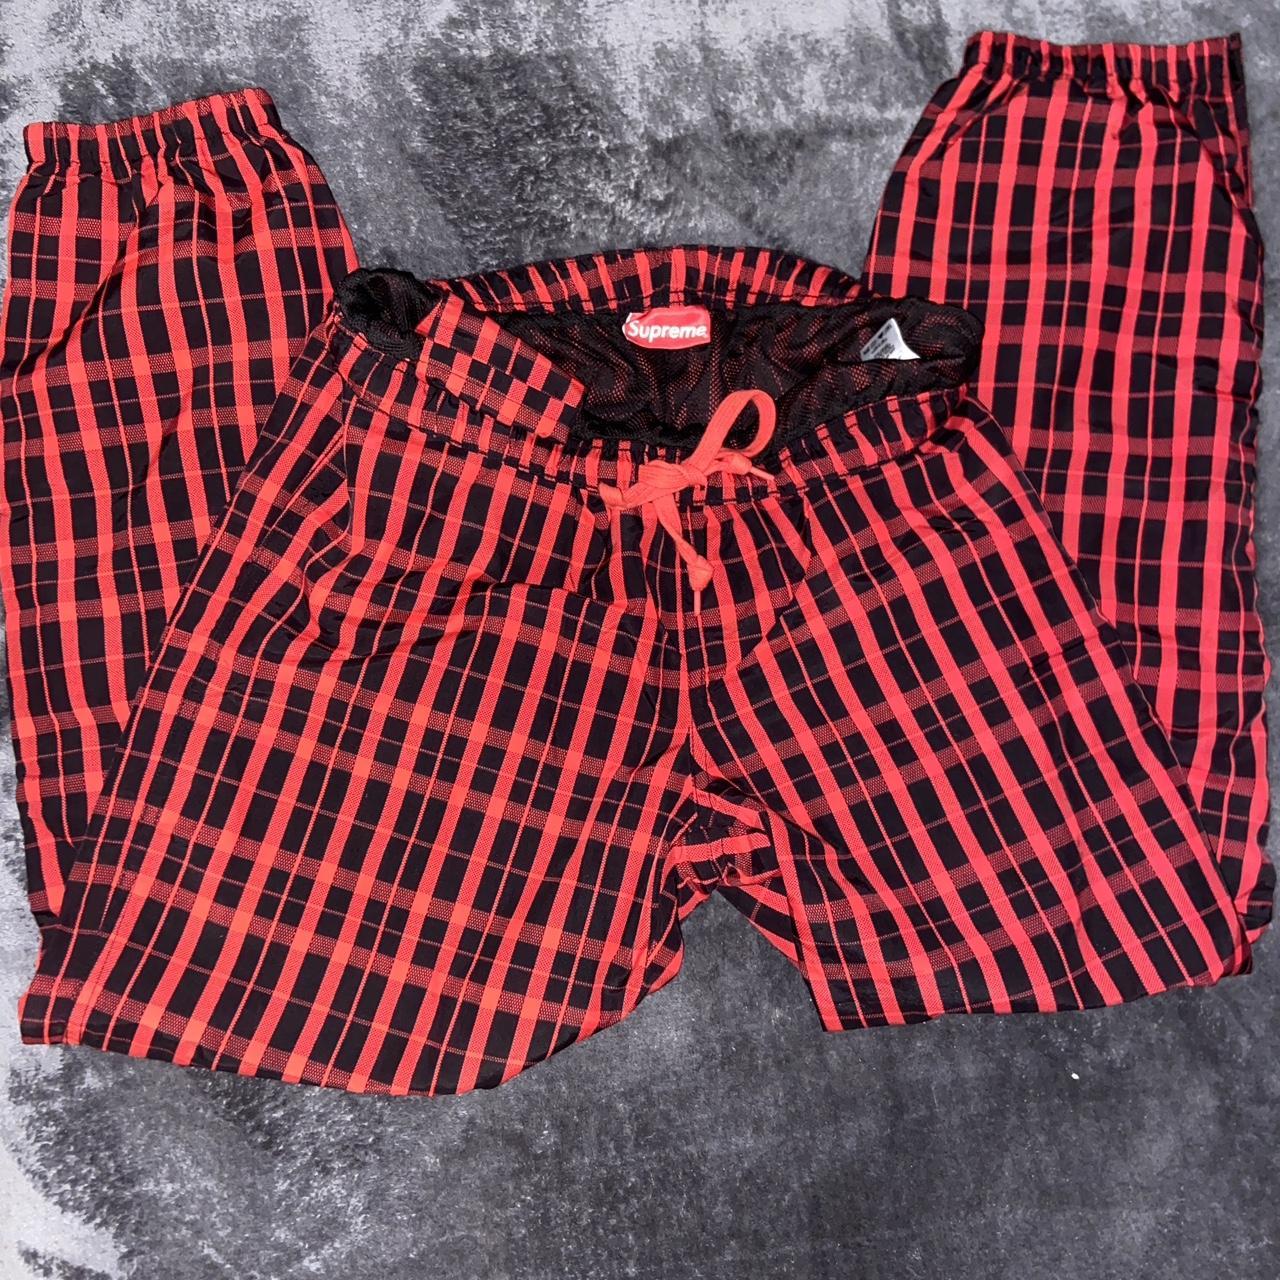 Supreme Nylon Plaid Track Pants in red and black, -...